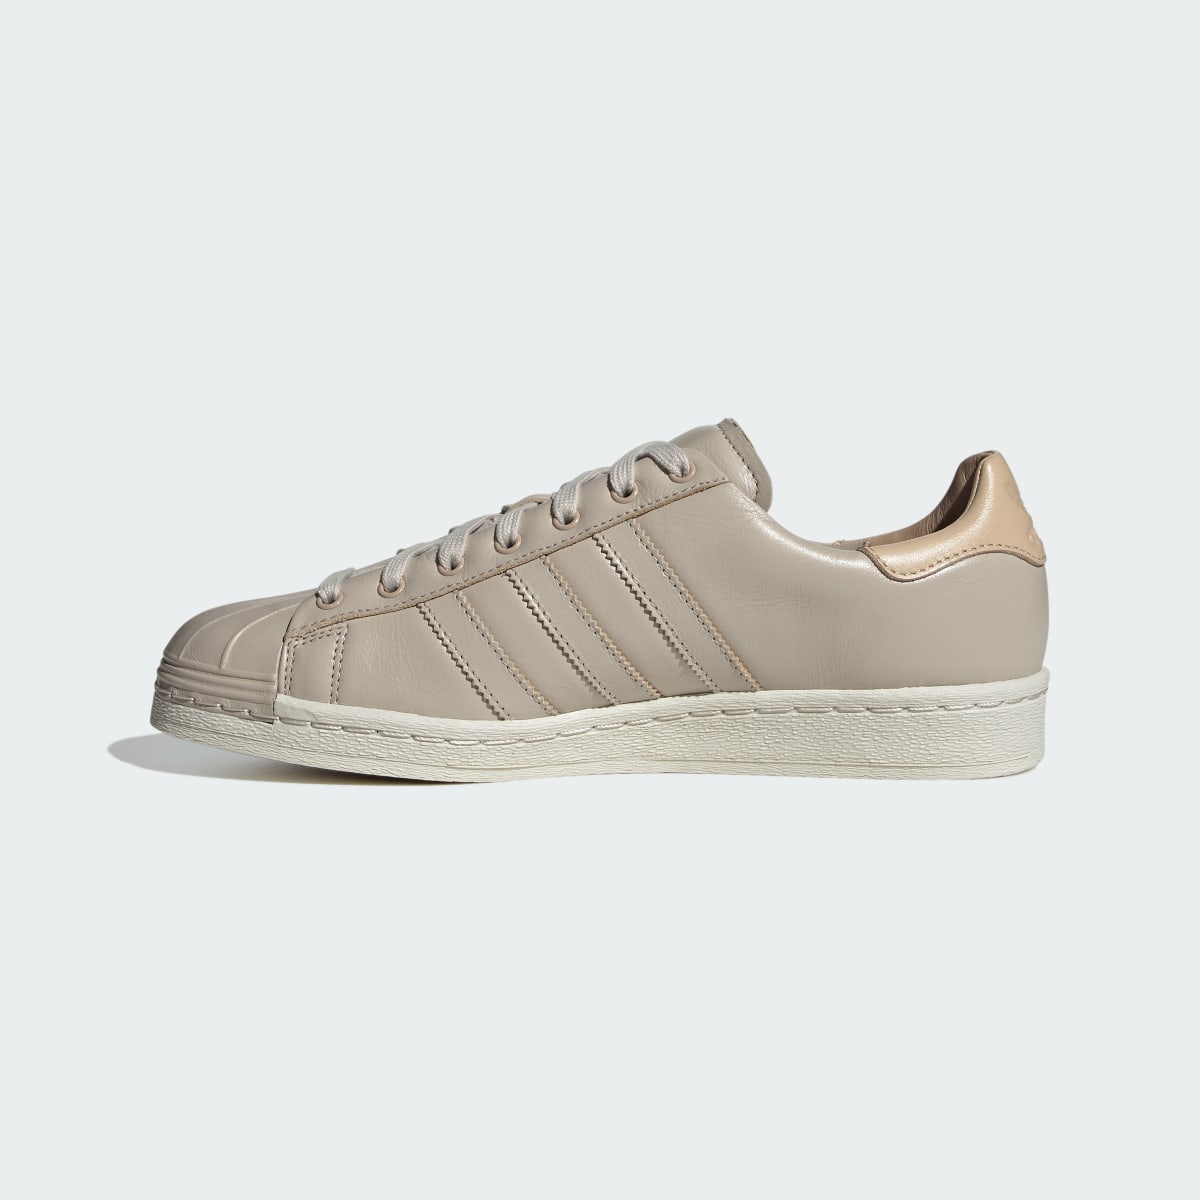 Adidas Superstar Lux Shoes. 7